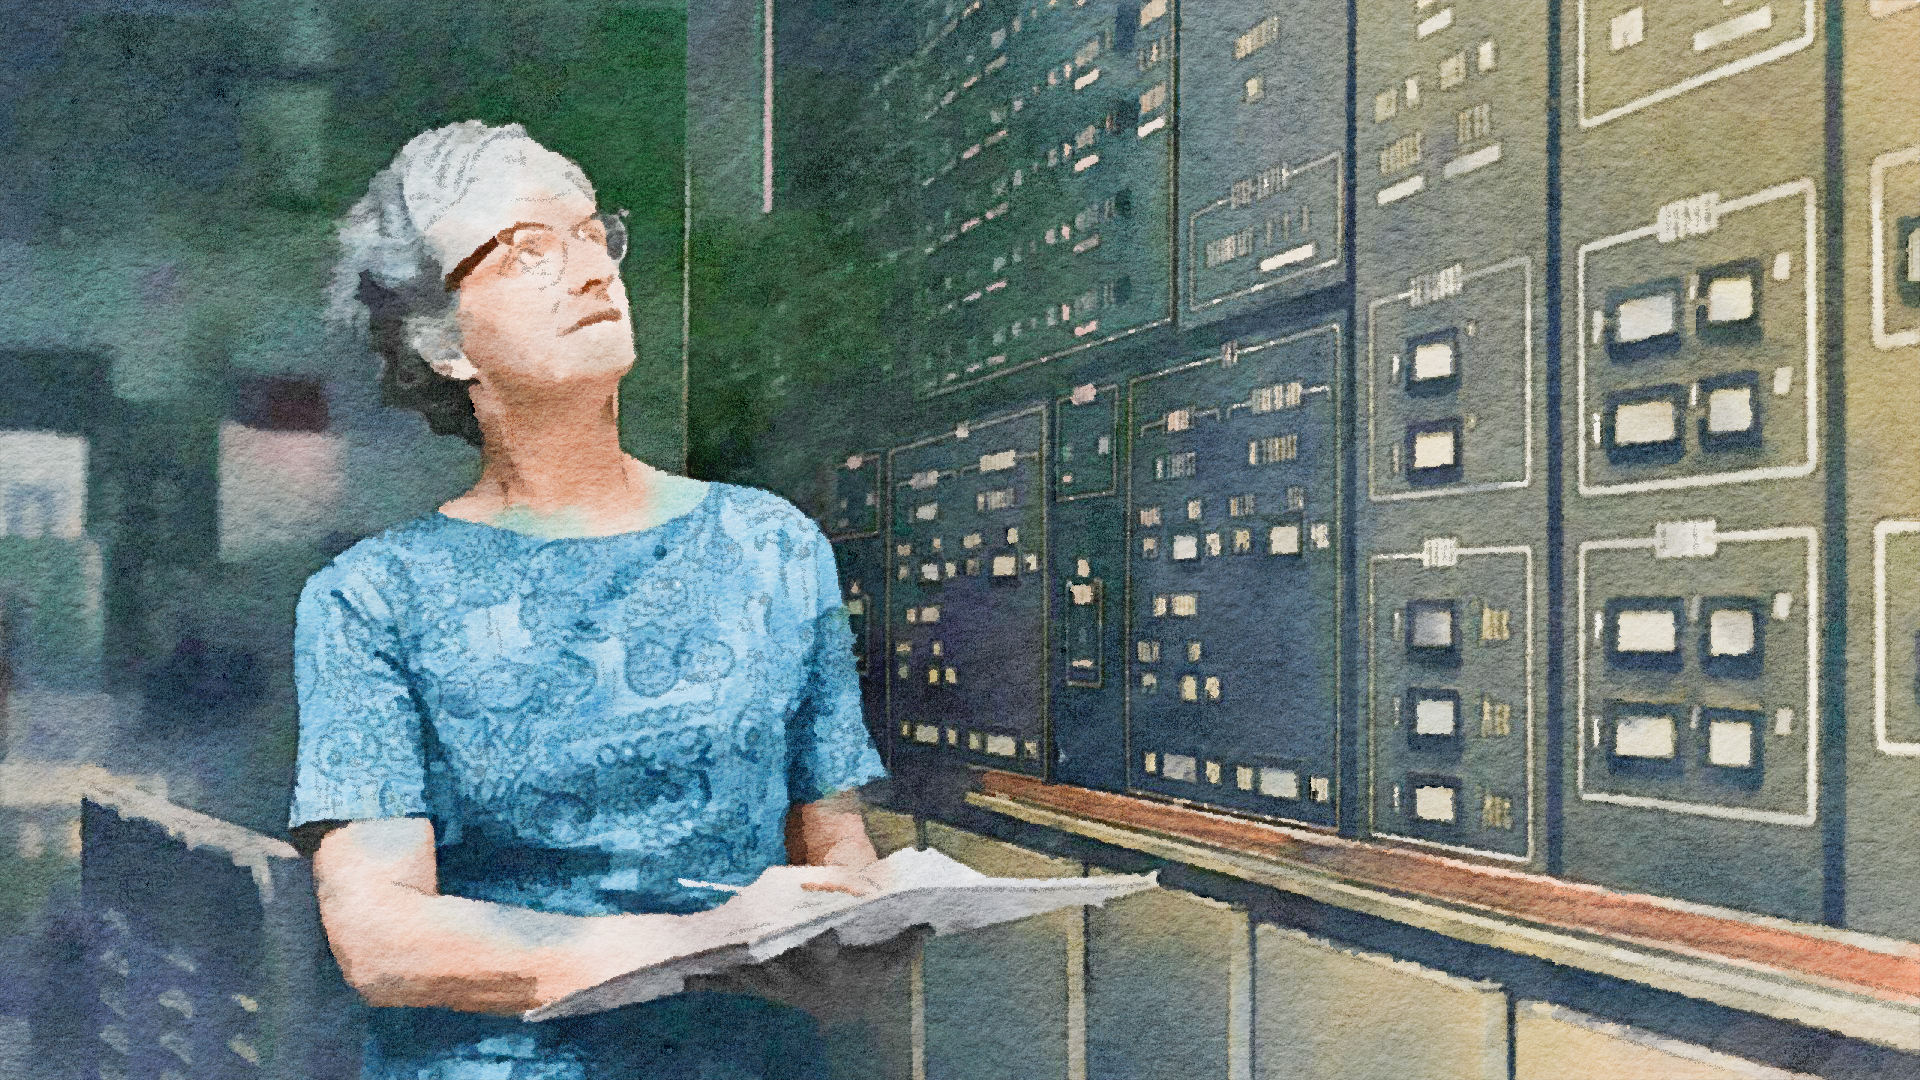 Nancy Grace Roman stands at the control display for the Orbiting Astronomical Observatory spacecraft in this simulated watercolor image.Watercolor effect generated with Waterlogue by Tinrocket.